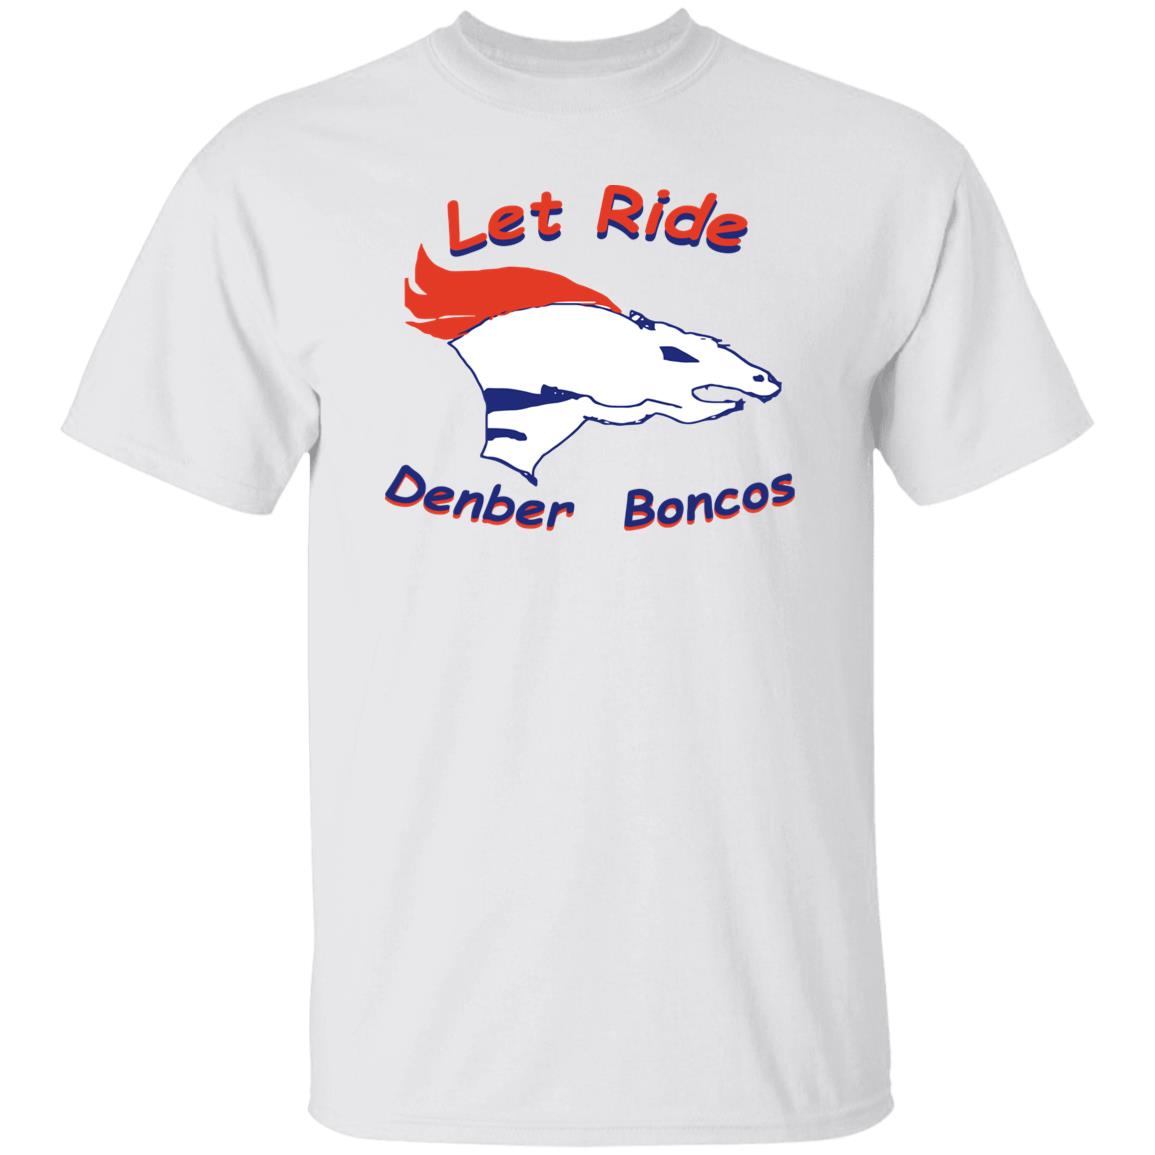 broncos country let's ride t shirt